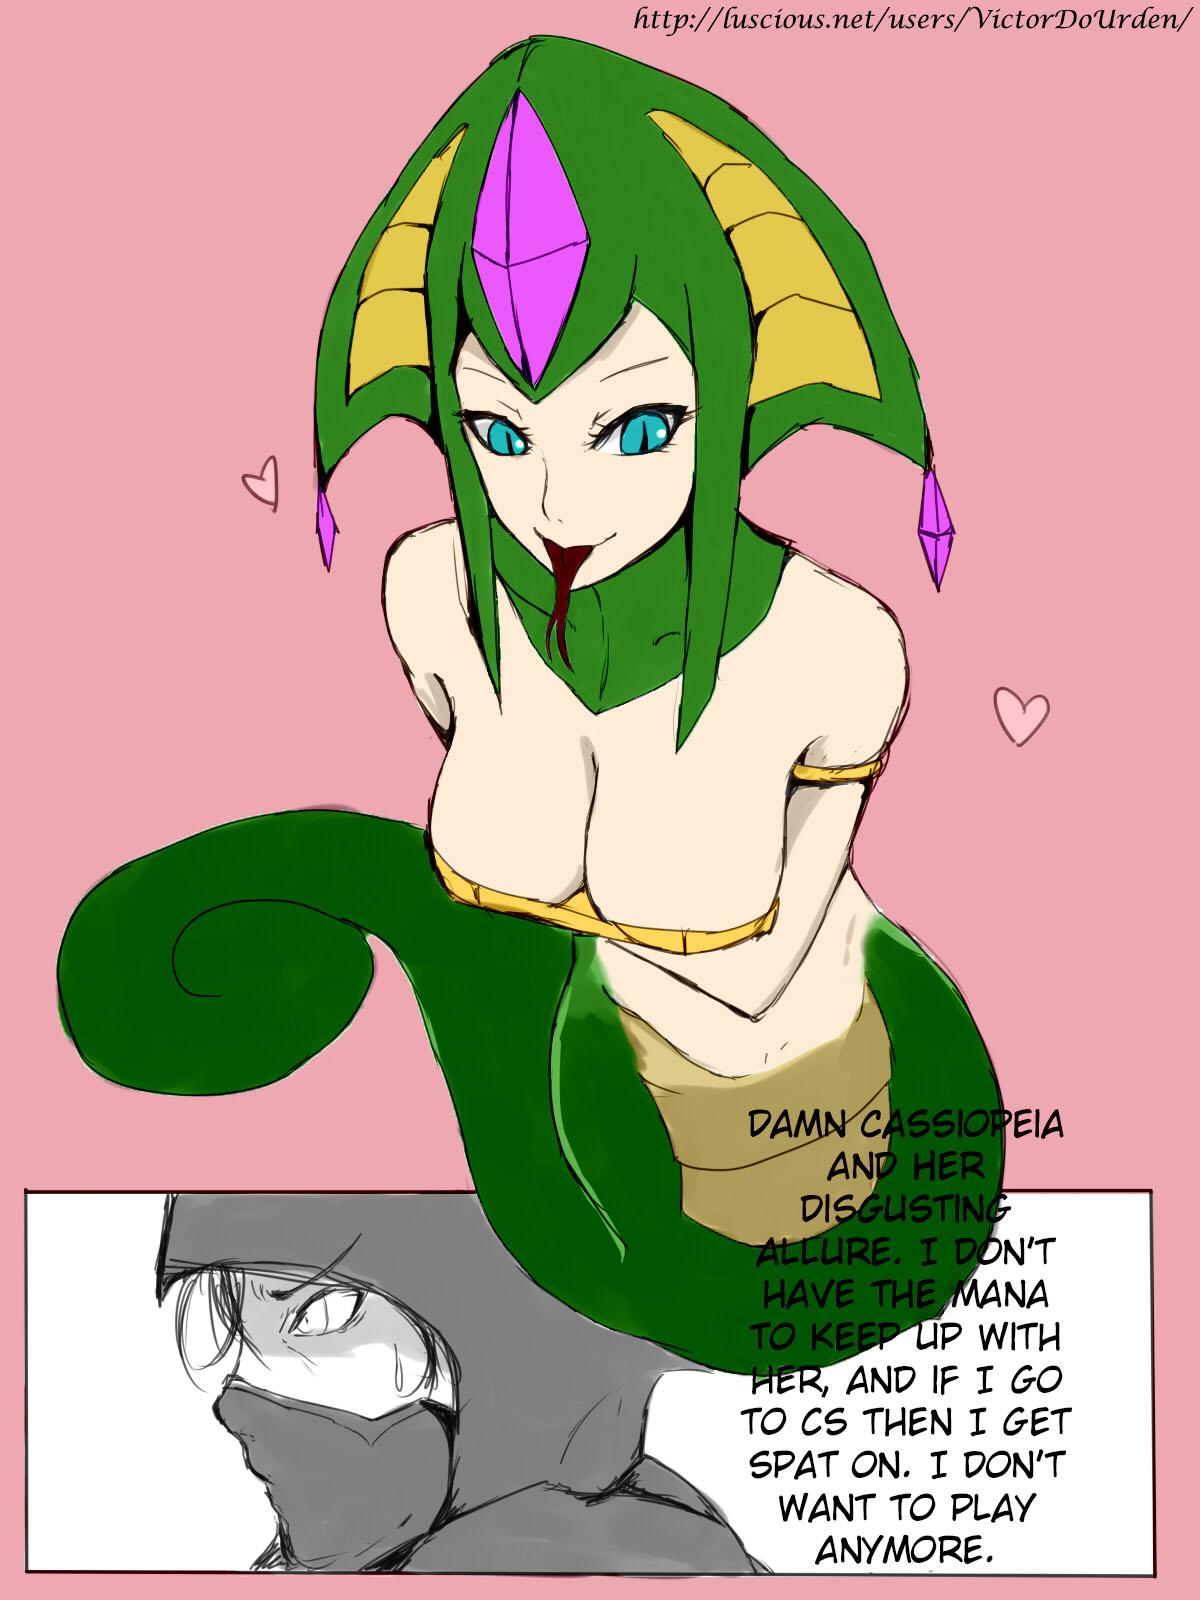 European Love Of Lamia - League of legends Chat - Page 2